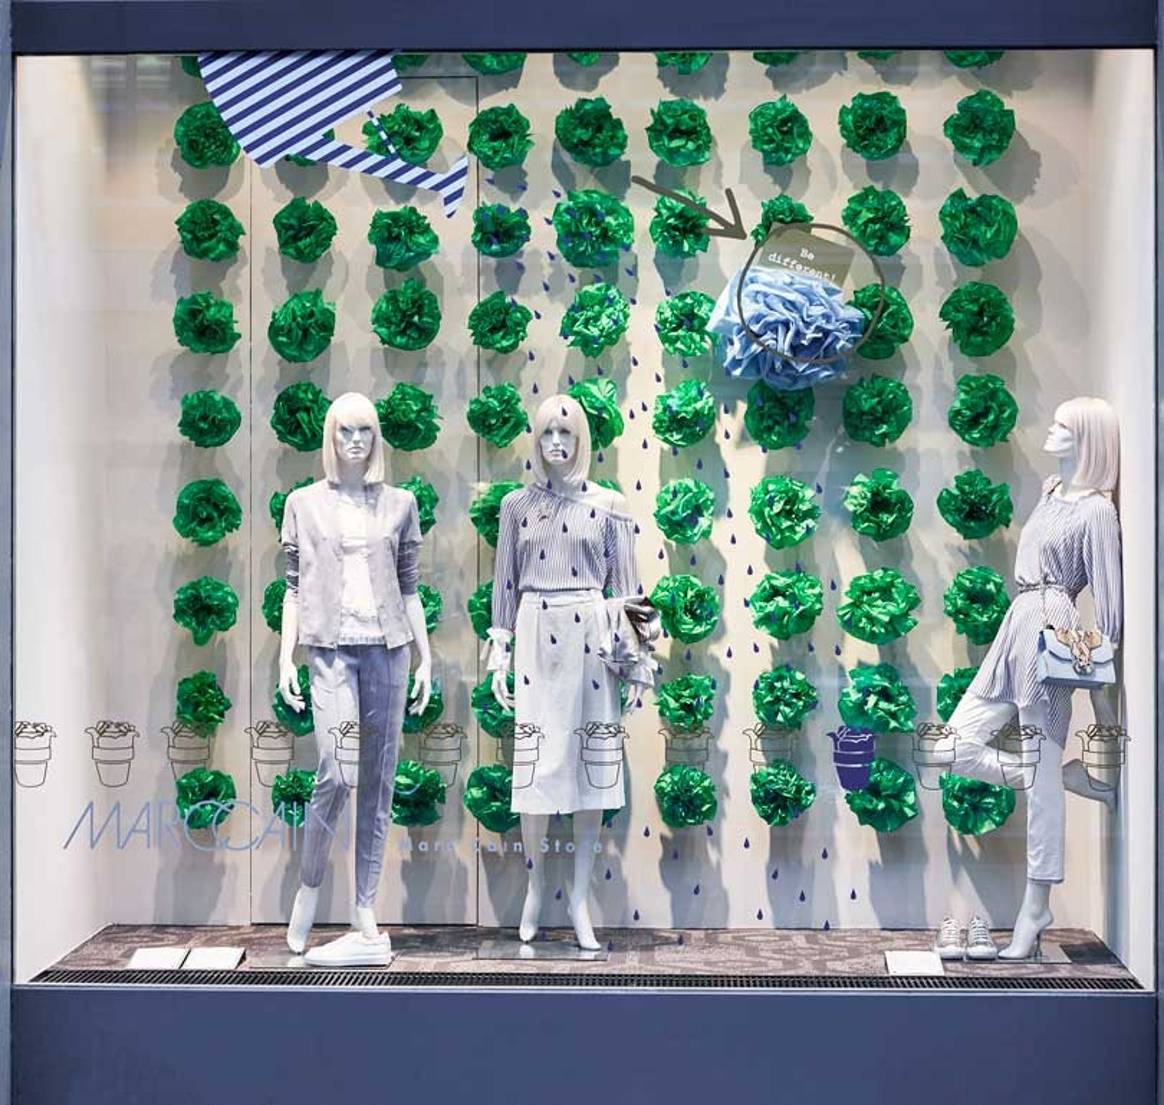 Marc Cain unveils global "green" store window concept with Seed Evolution